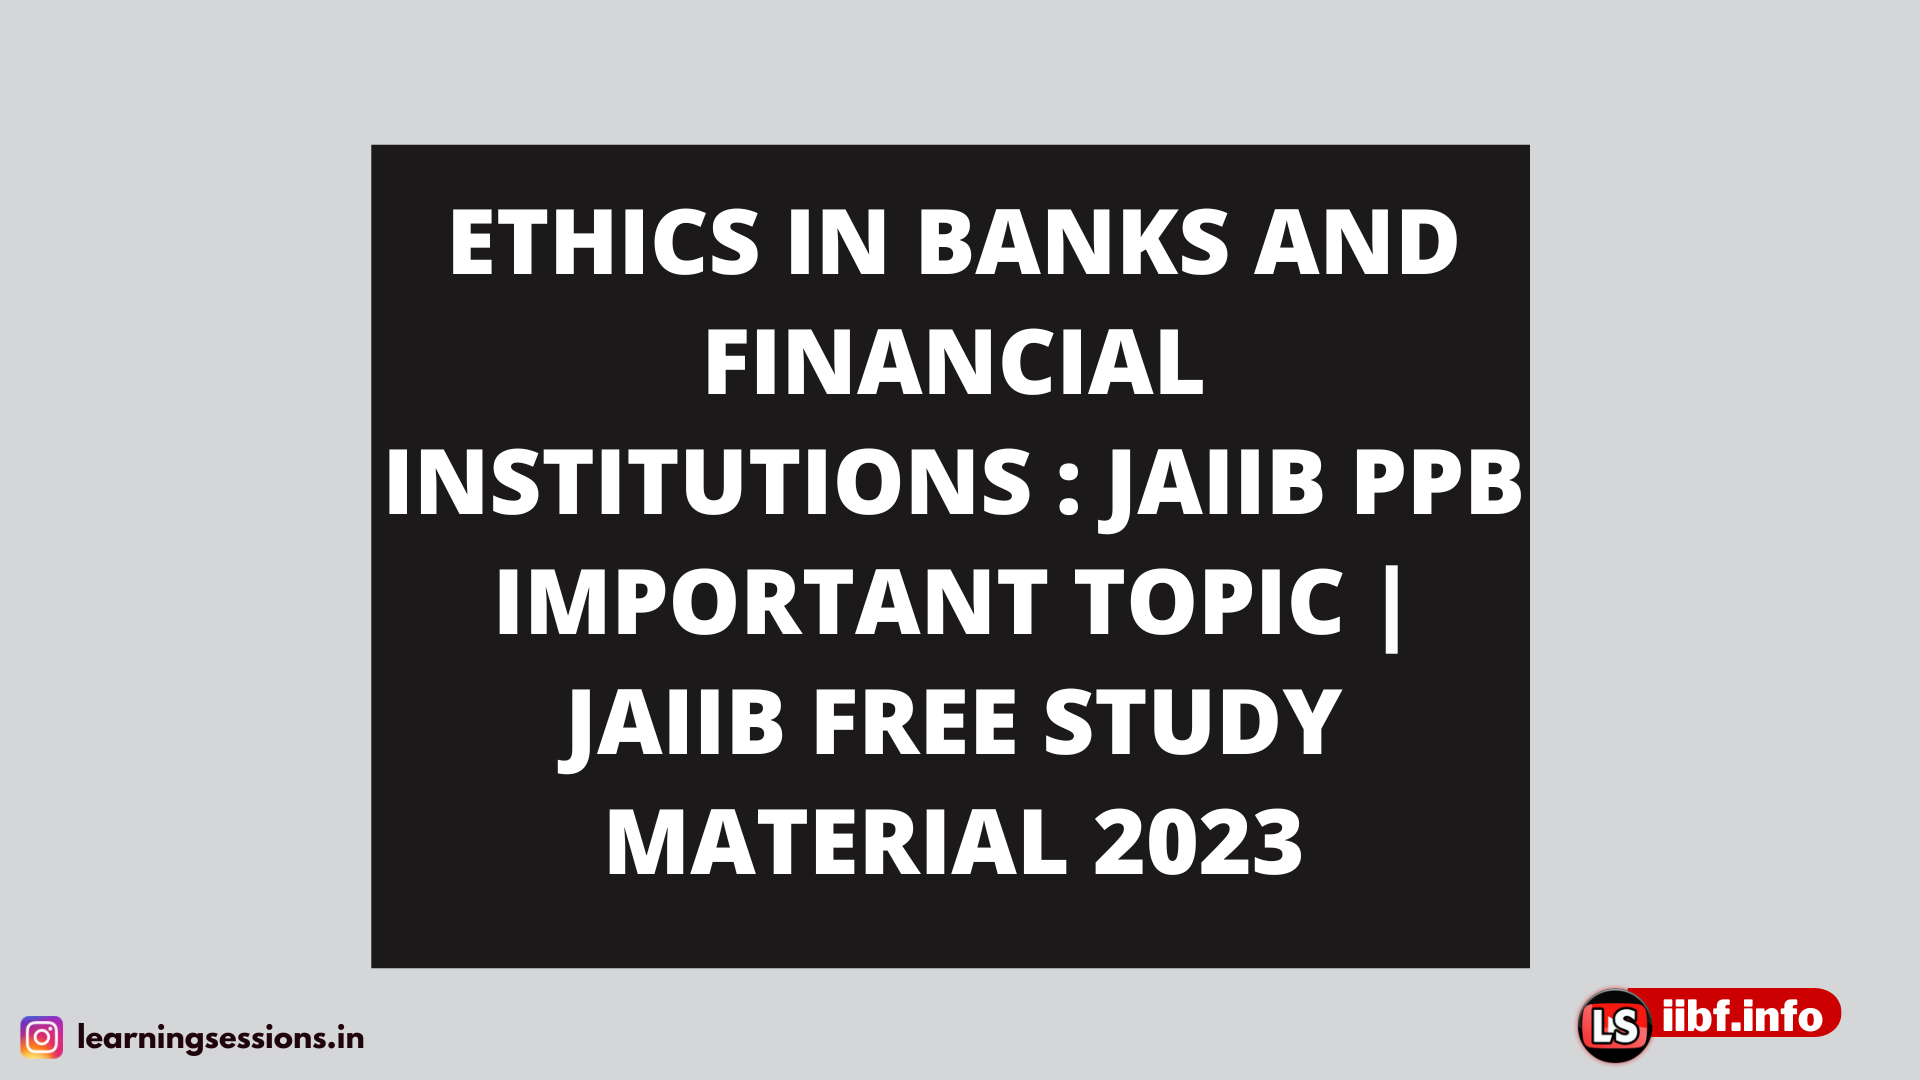 ETHICS IN BANKS AND FINANCIAL INSTITUTIONS : JAIIB PPB IMPORTANT TOPIC | JAIIB FREE STUDY MATERIAL 2023